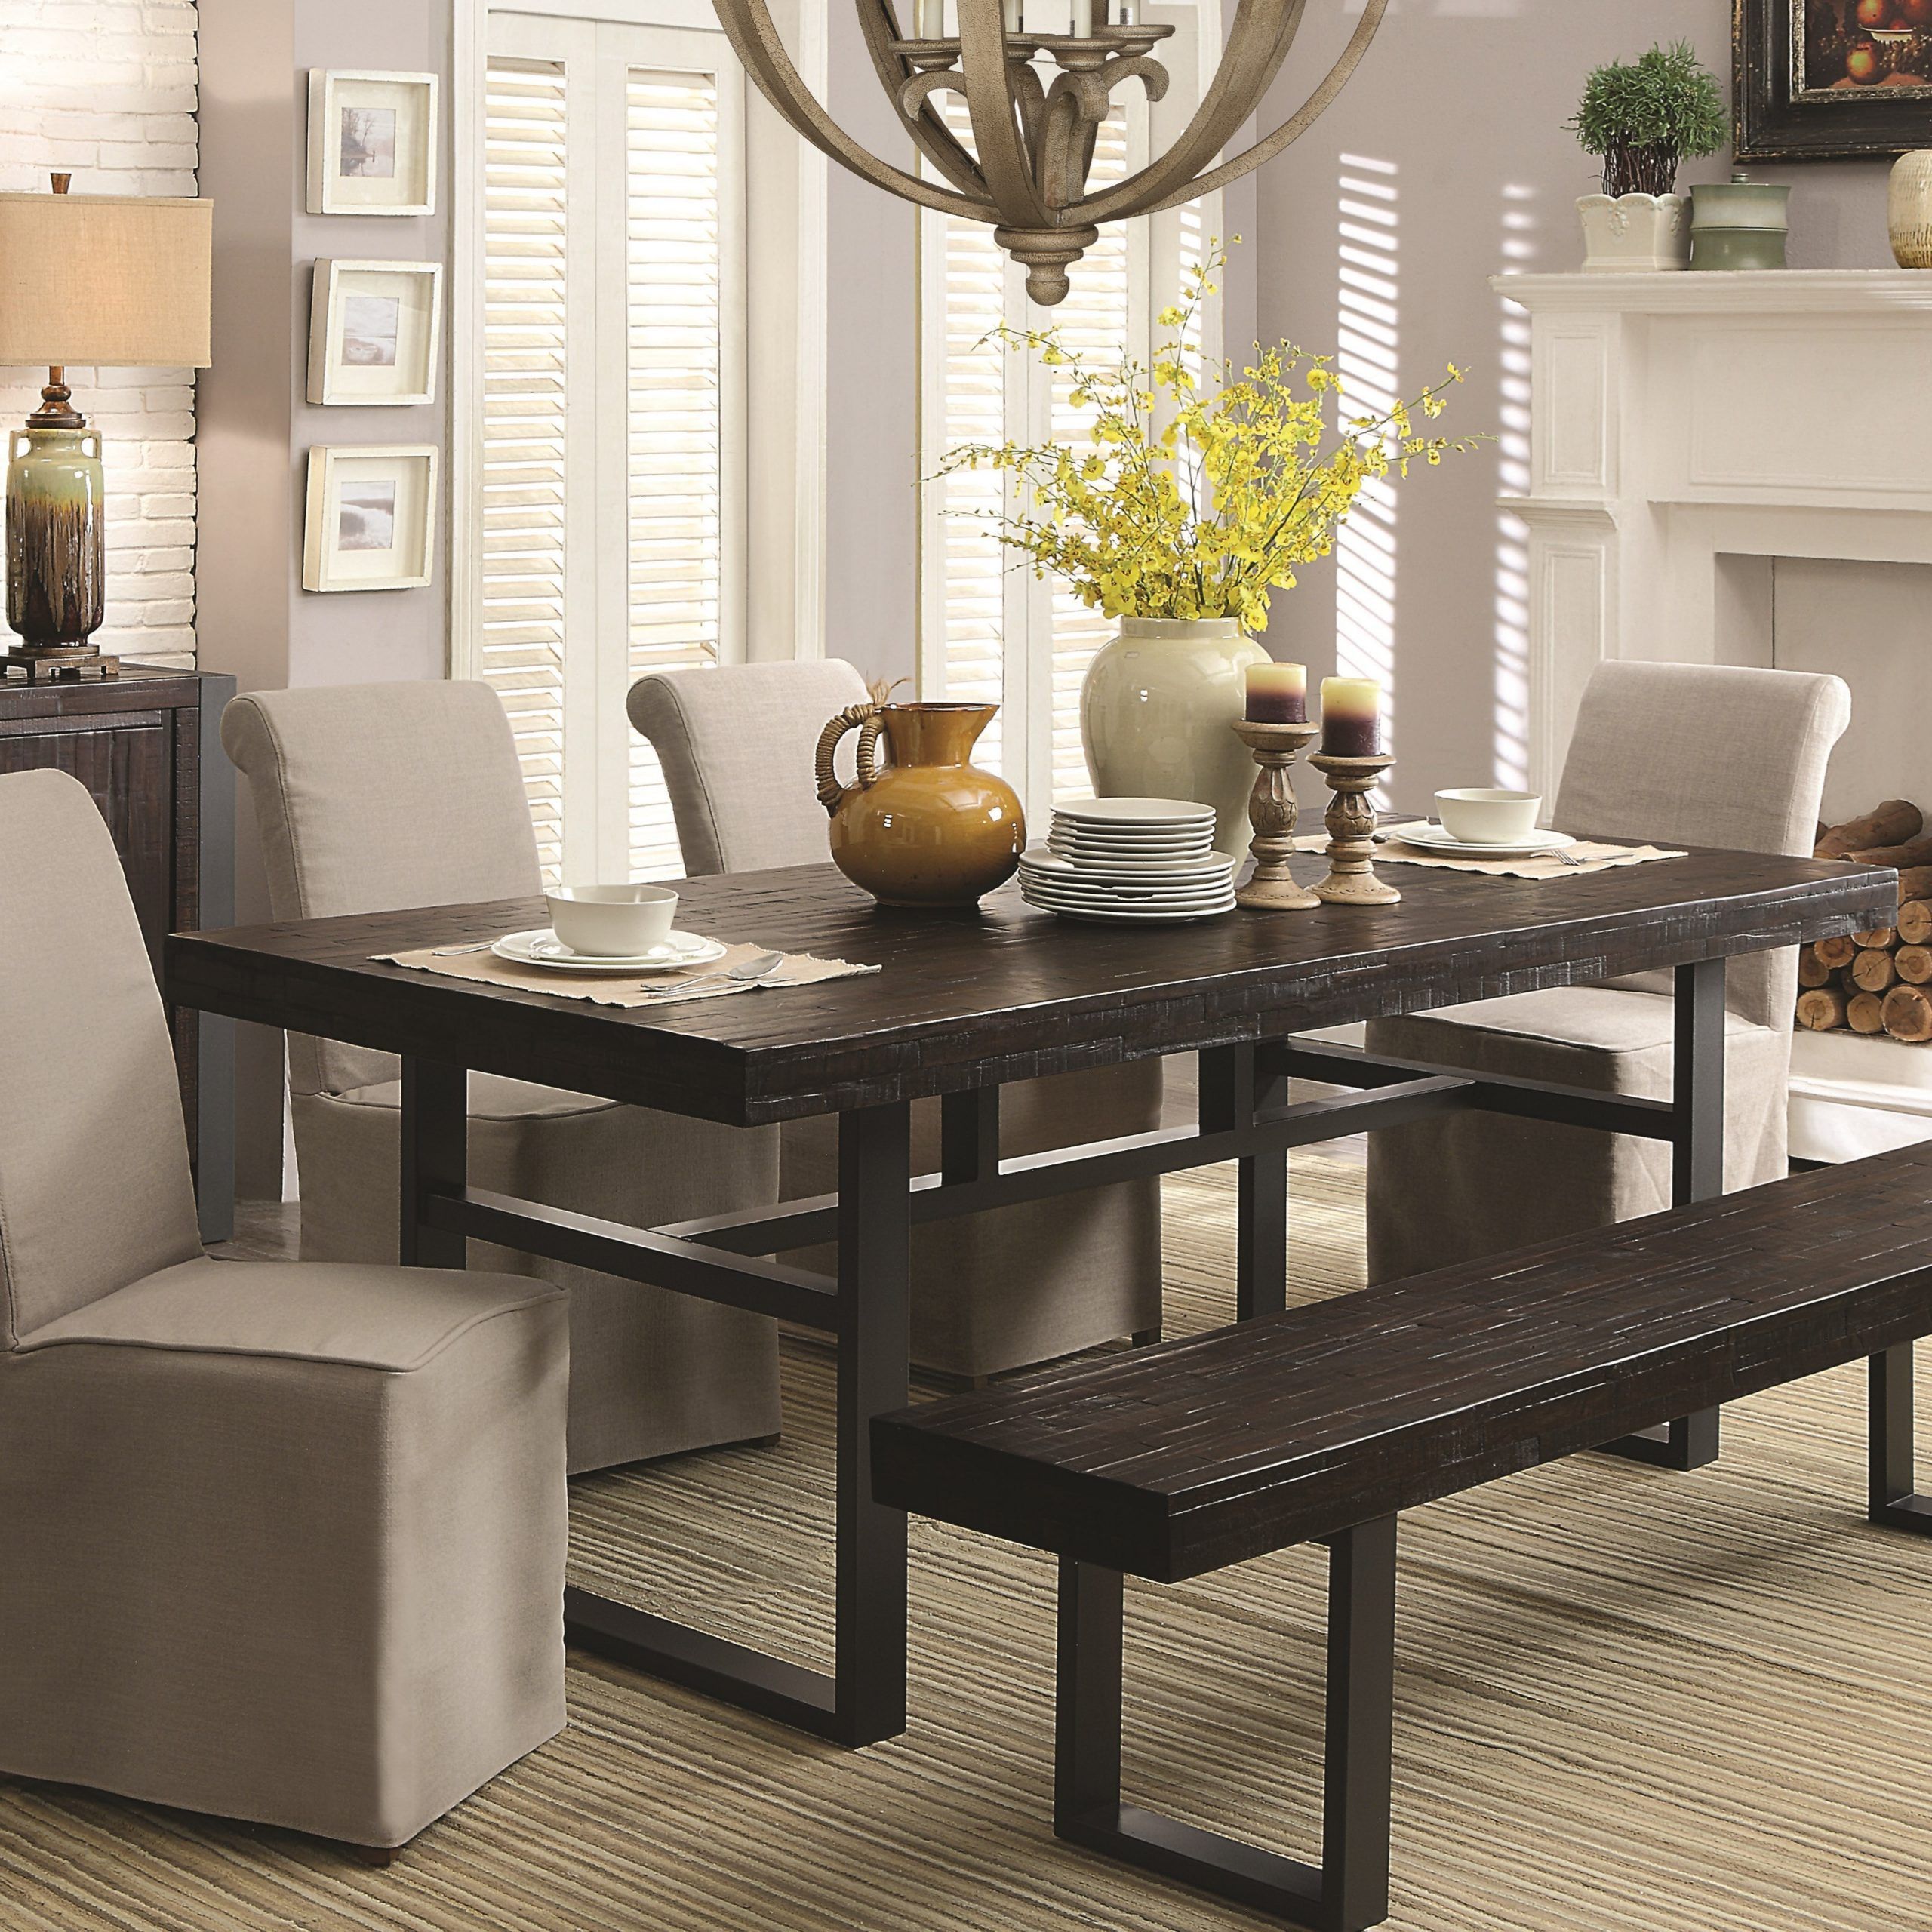 Keller Contemporary Rectangular Dining Table With Metal In Latest Natural Rectangle Dining Tables (View 2 of 15)